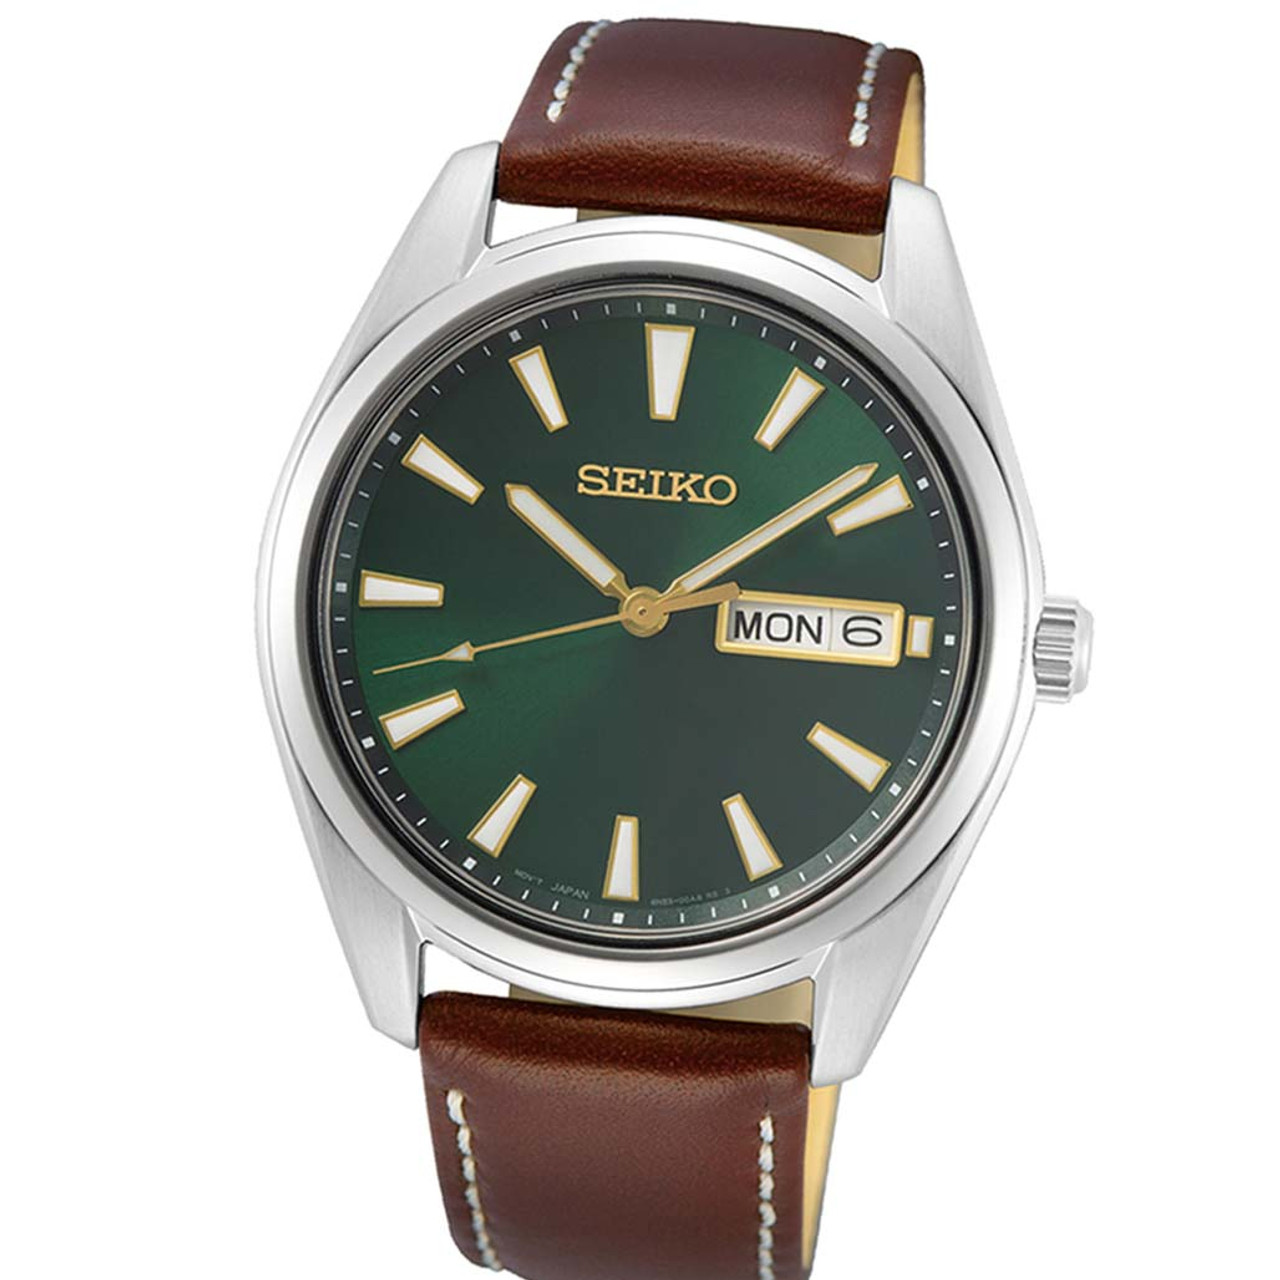 Seiko 40mm Day-Date Quartz Watch with Vibrant Green Dial SUR449